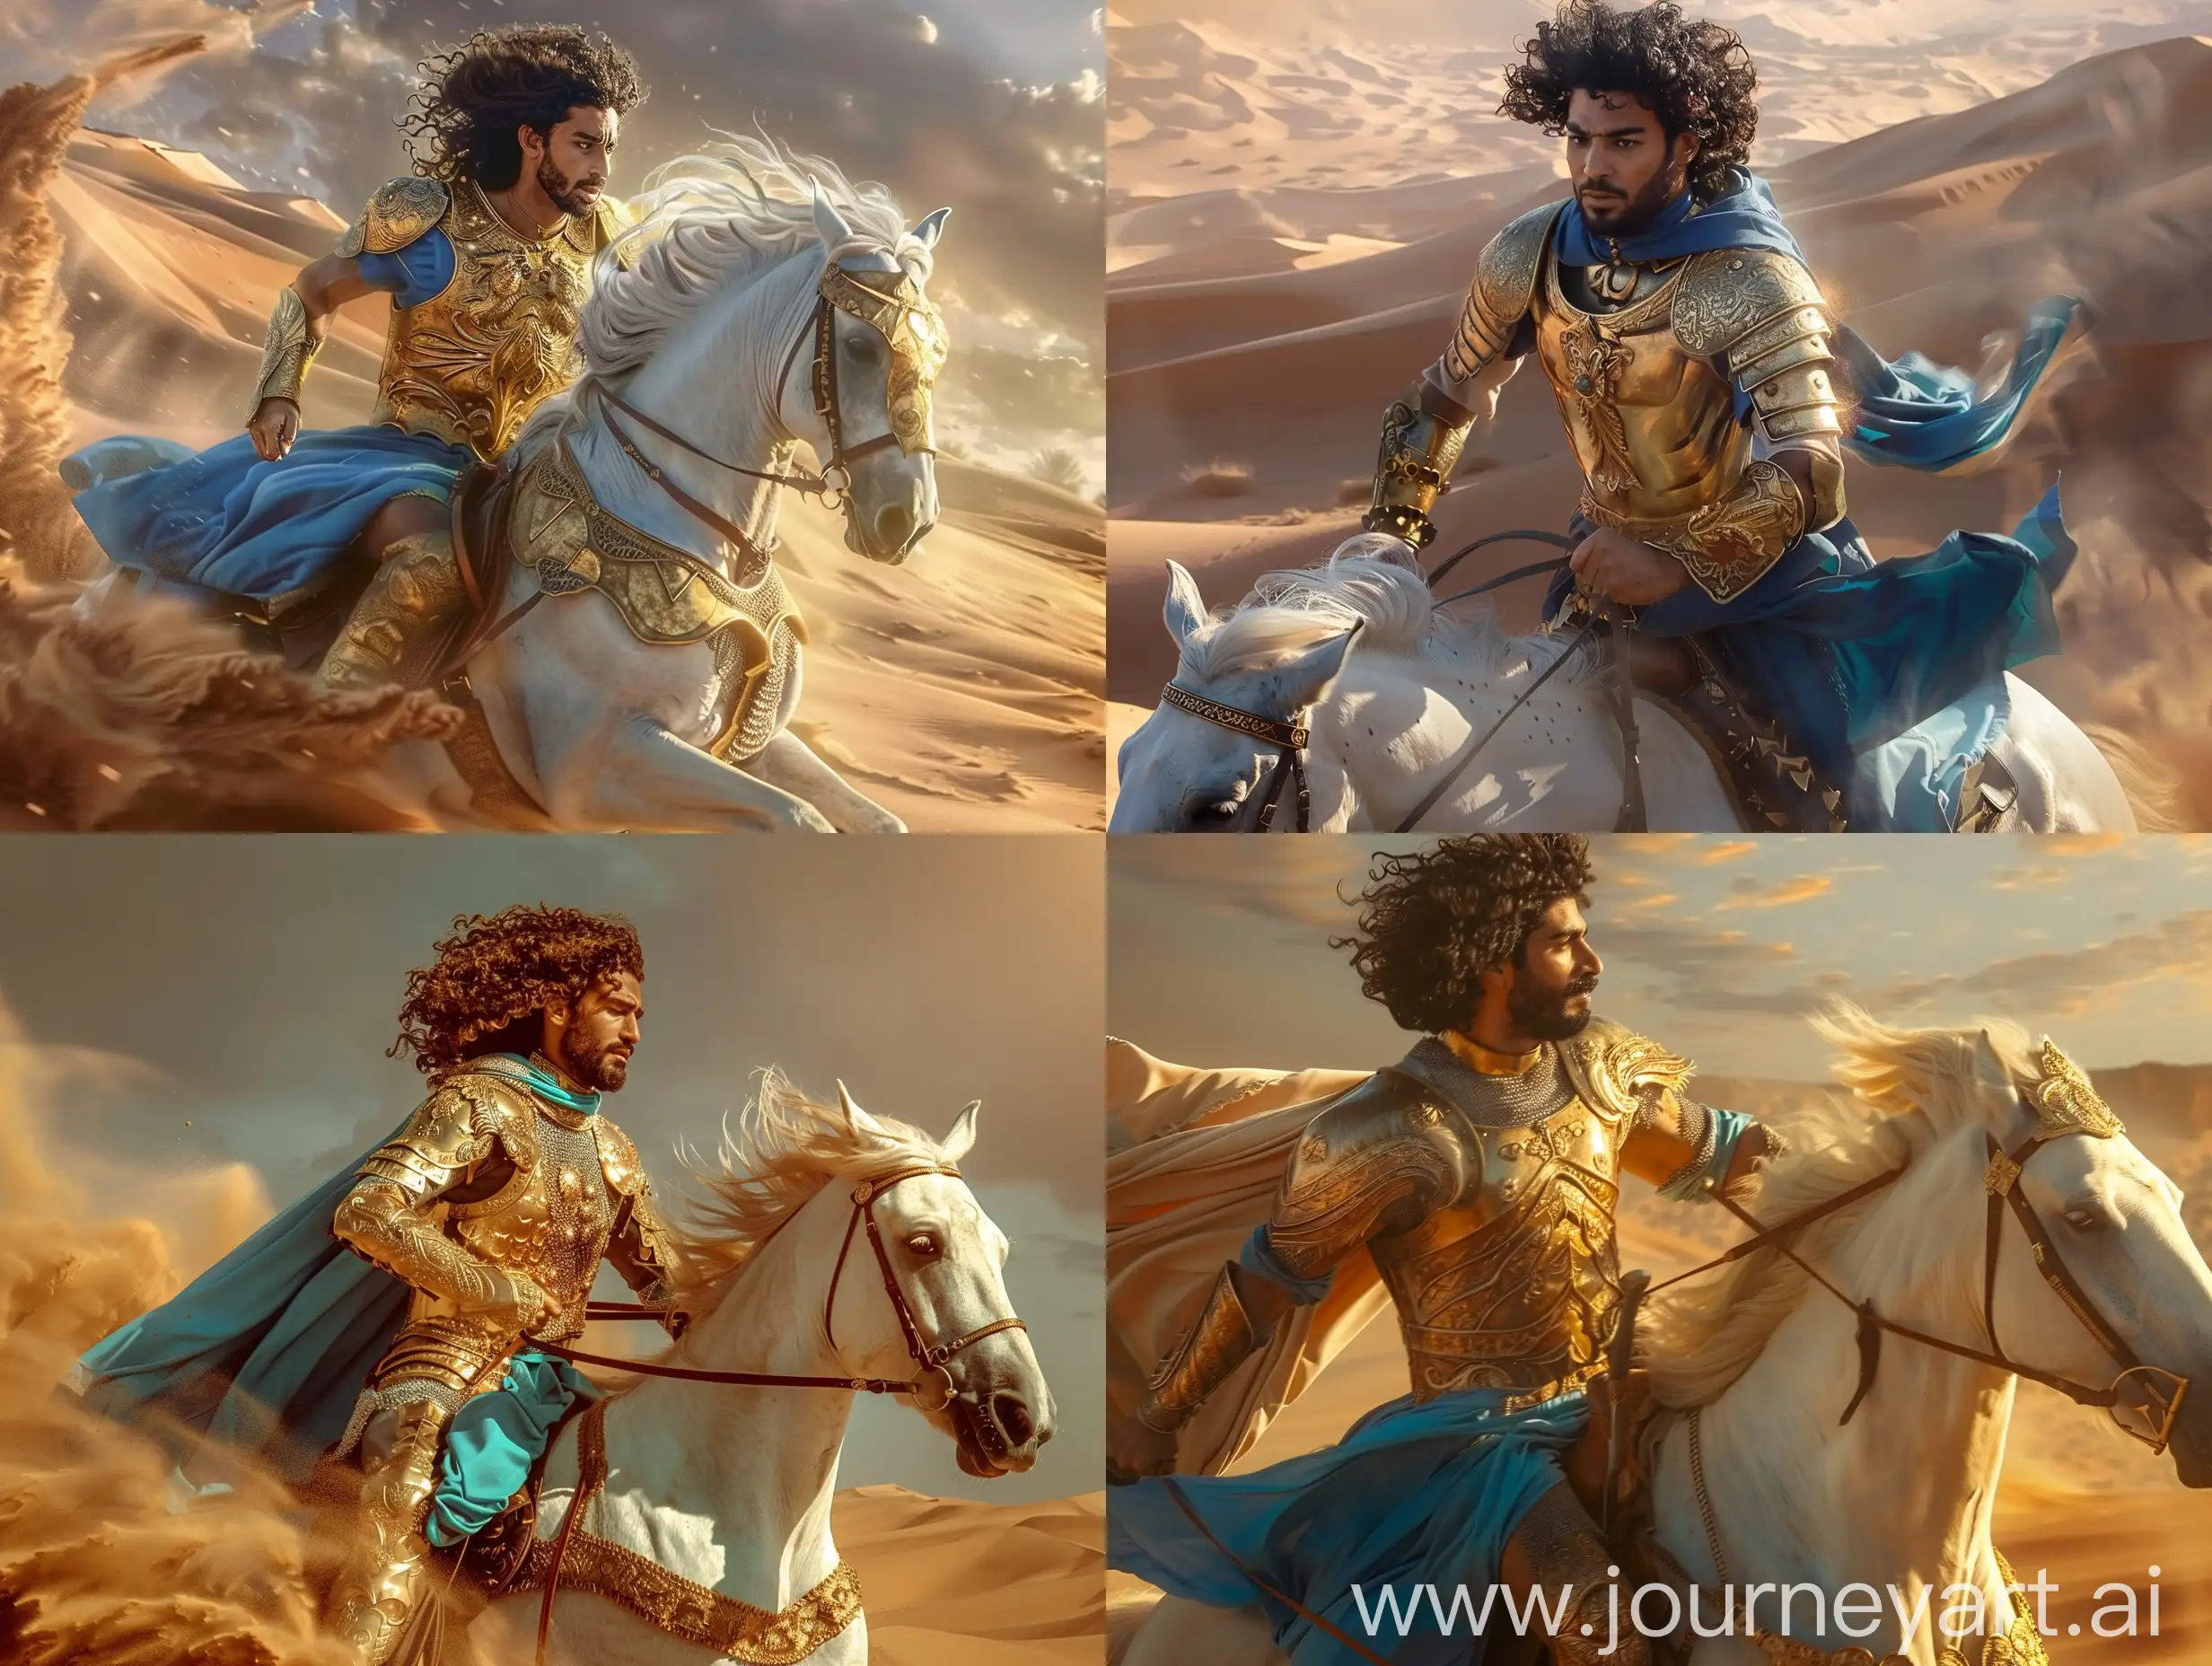 A man with curly hair and a beard, golden armor with a blue dress, on a white horse galloping through the desert, cinematic lighting